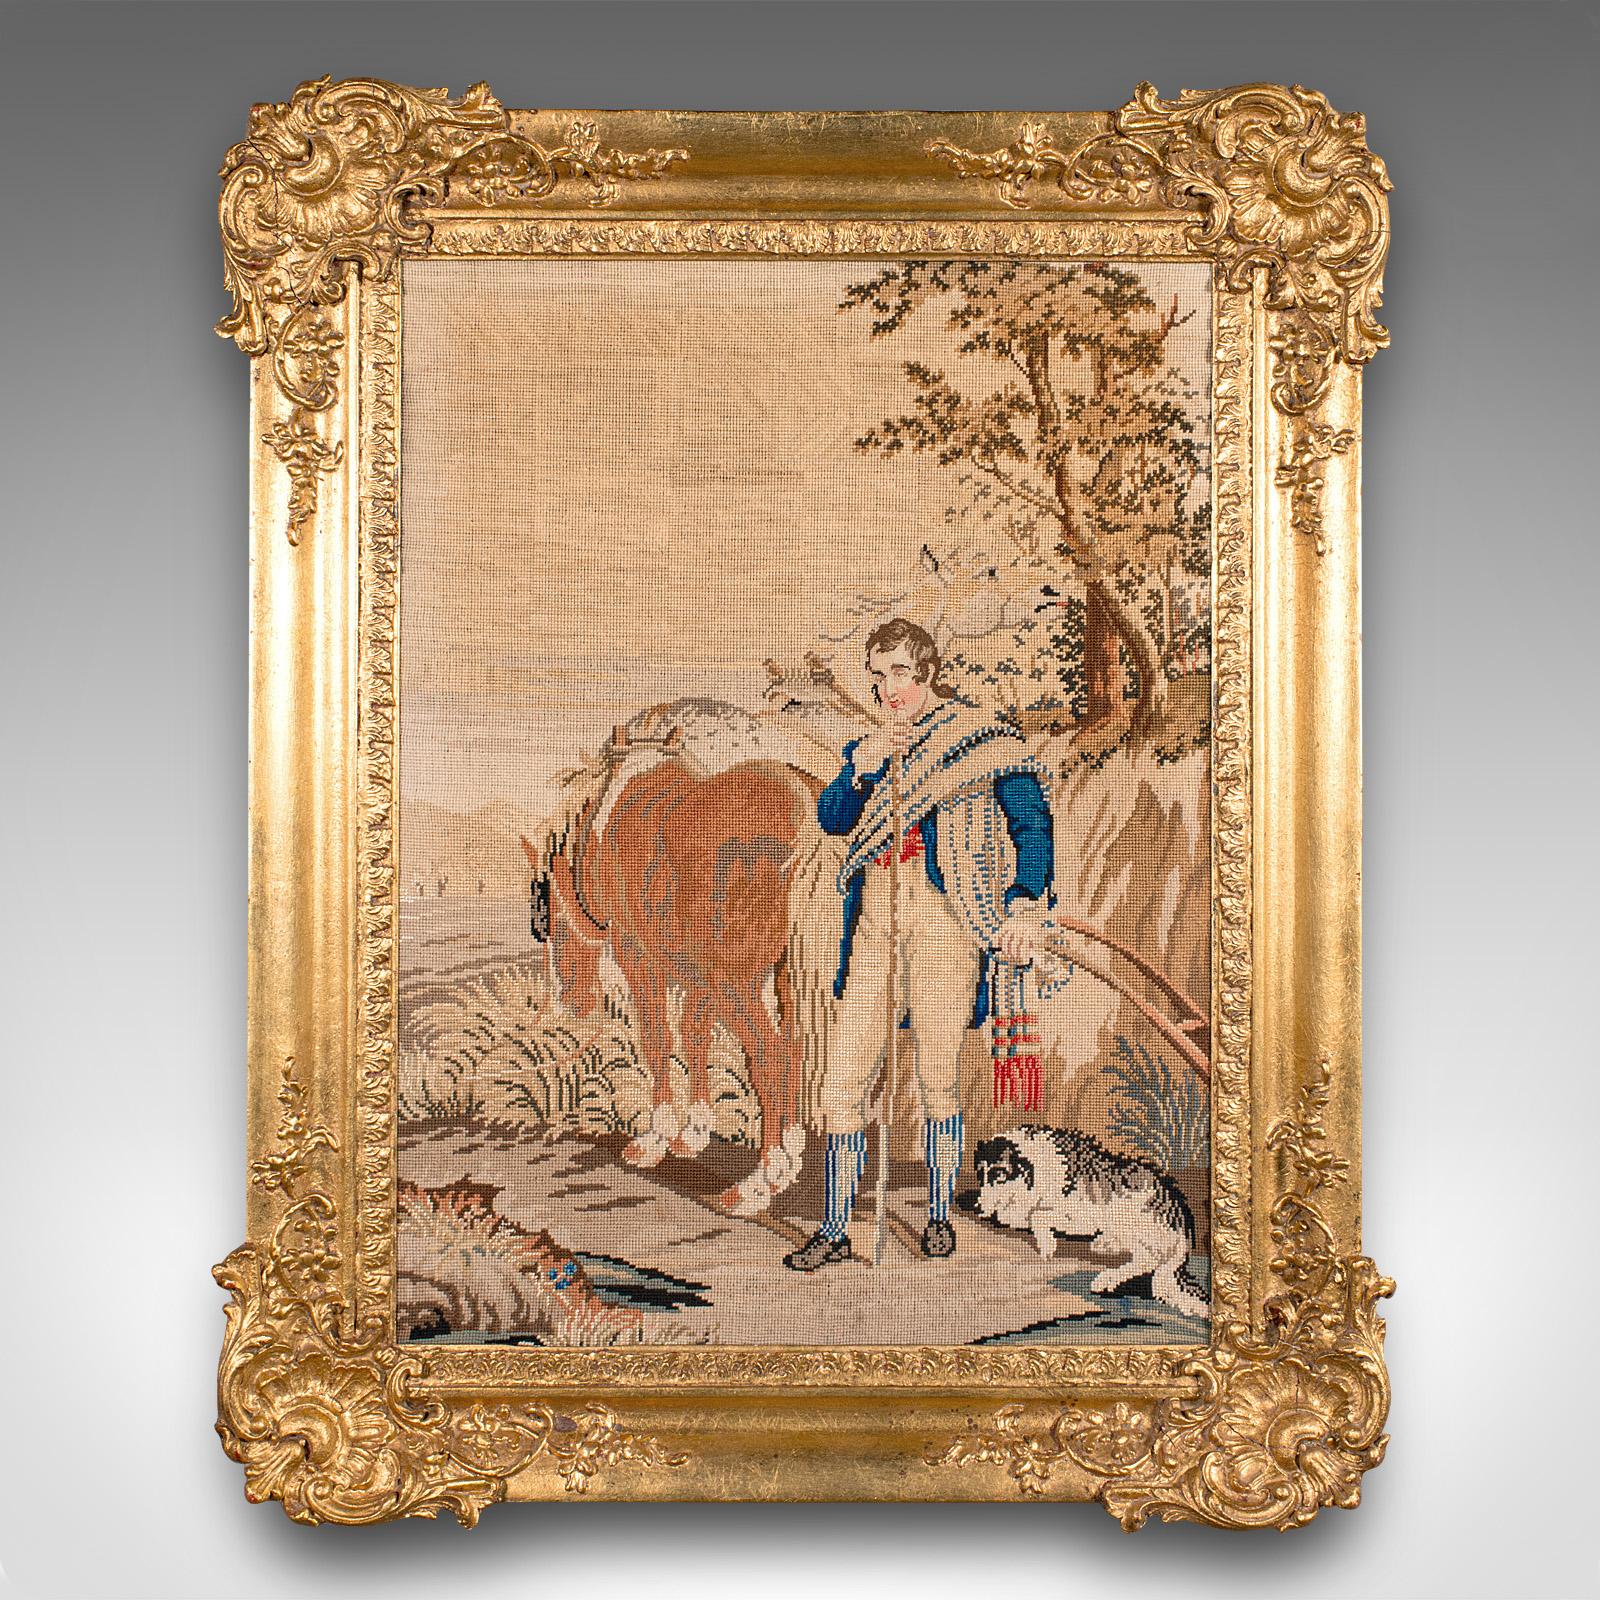 This is an antique framed tapestry. A Continental, needlepoint and giltwood decorative panel, dating to the Early Victorian period, circa 1850.

Grace your wall with this wonderful display tapestry
Displaying a desirable aged patina and in good